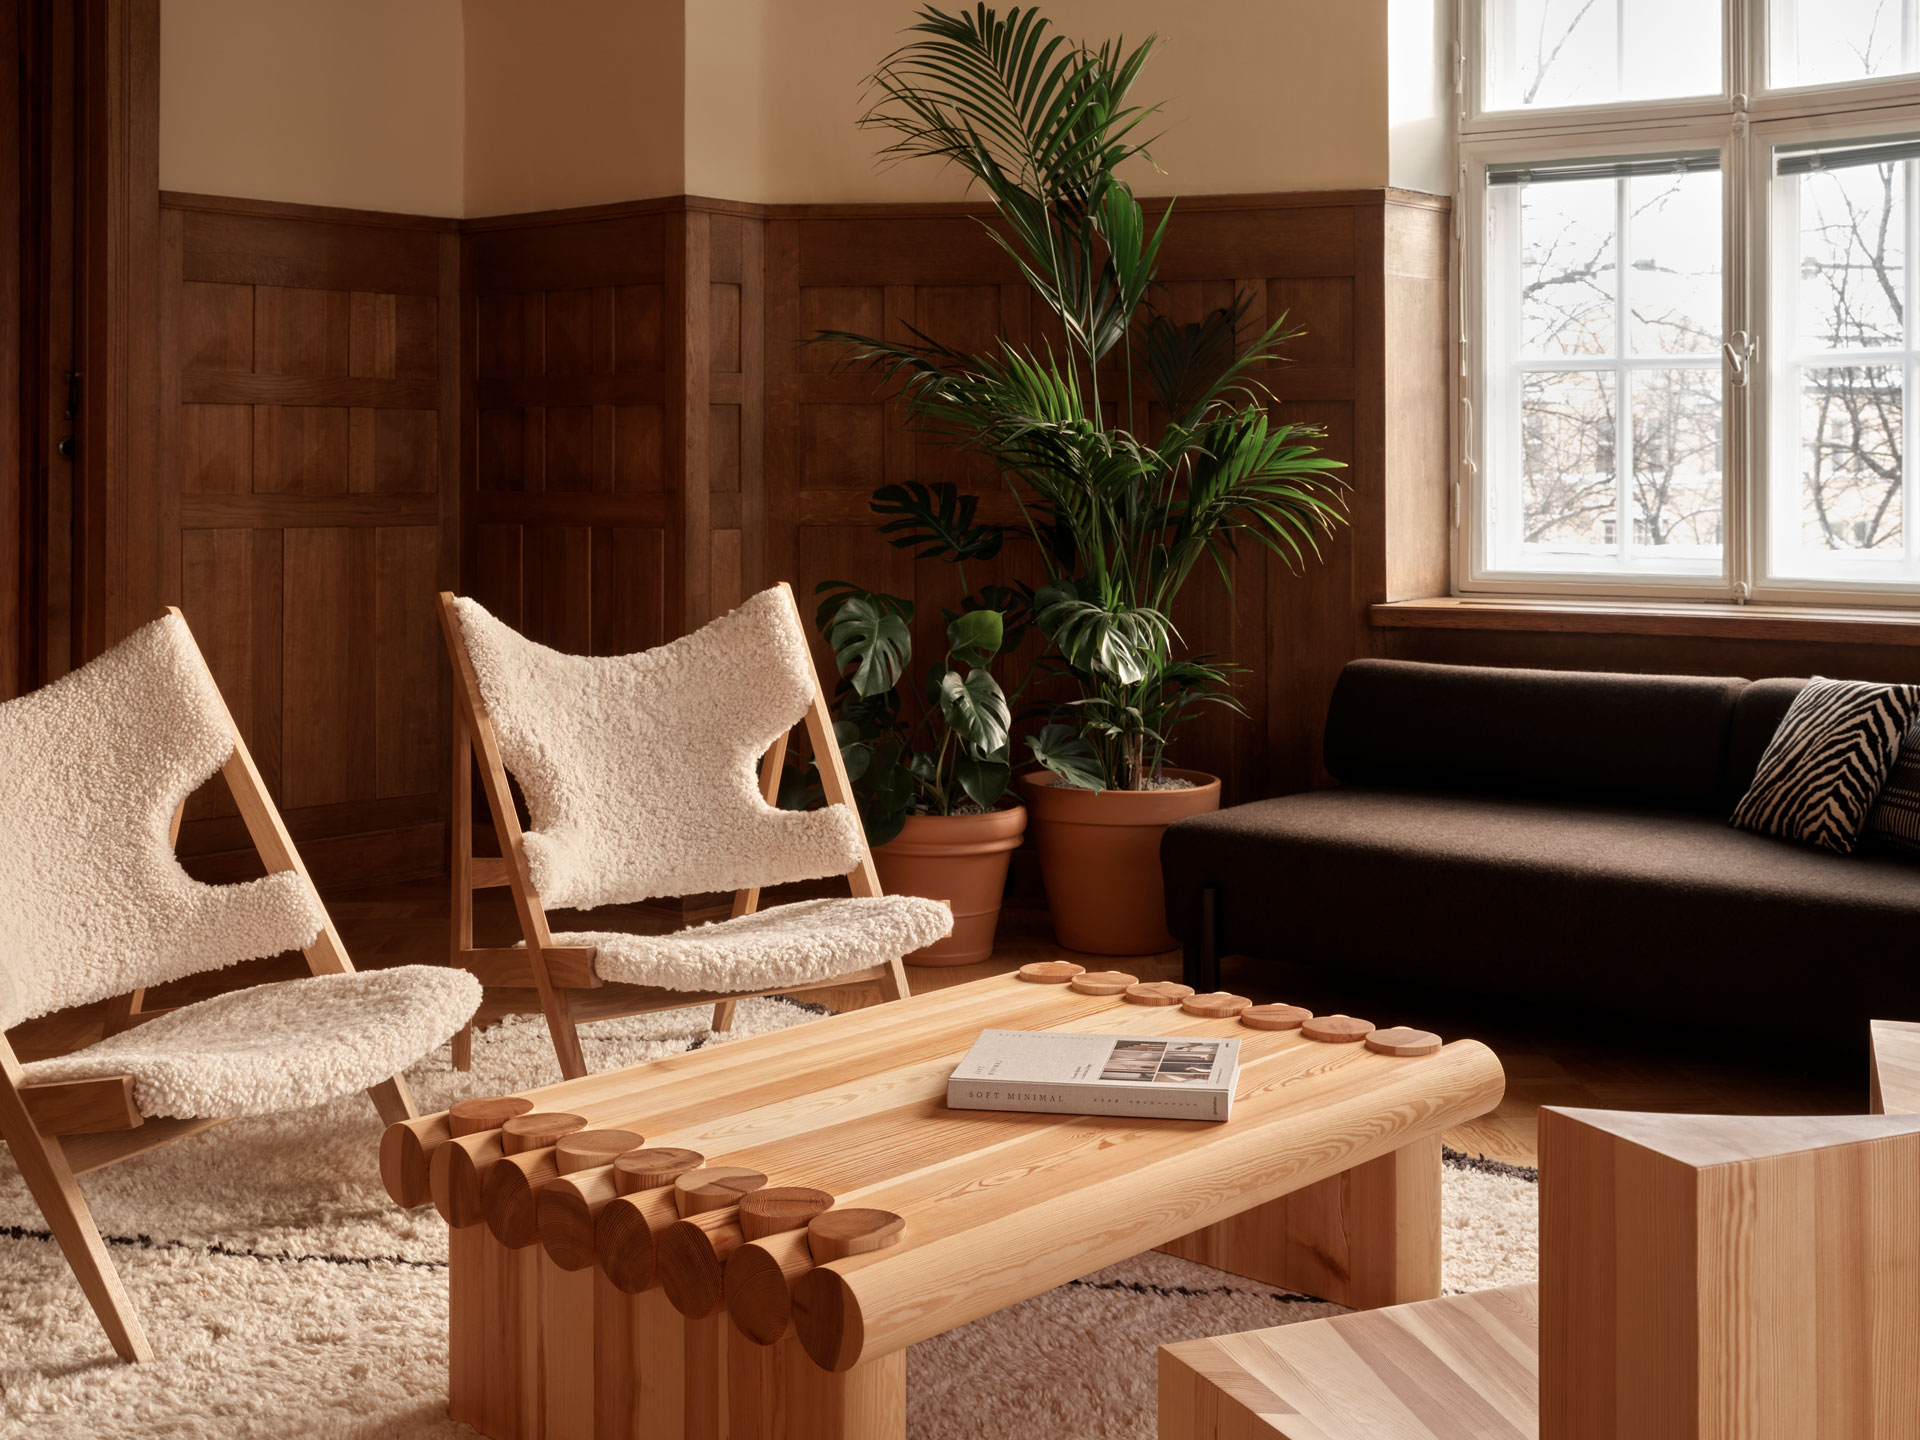 wooden panels, solid wood crafted furniture, large coffee table, dark grey-brown sofa, couple of lounge chairs, large plants, warm atmosphere